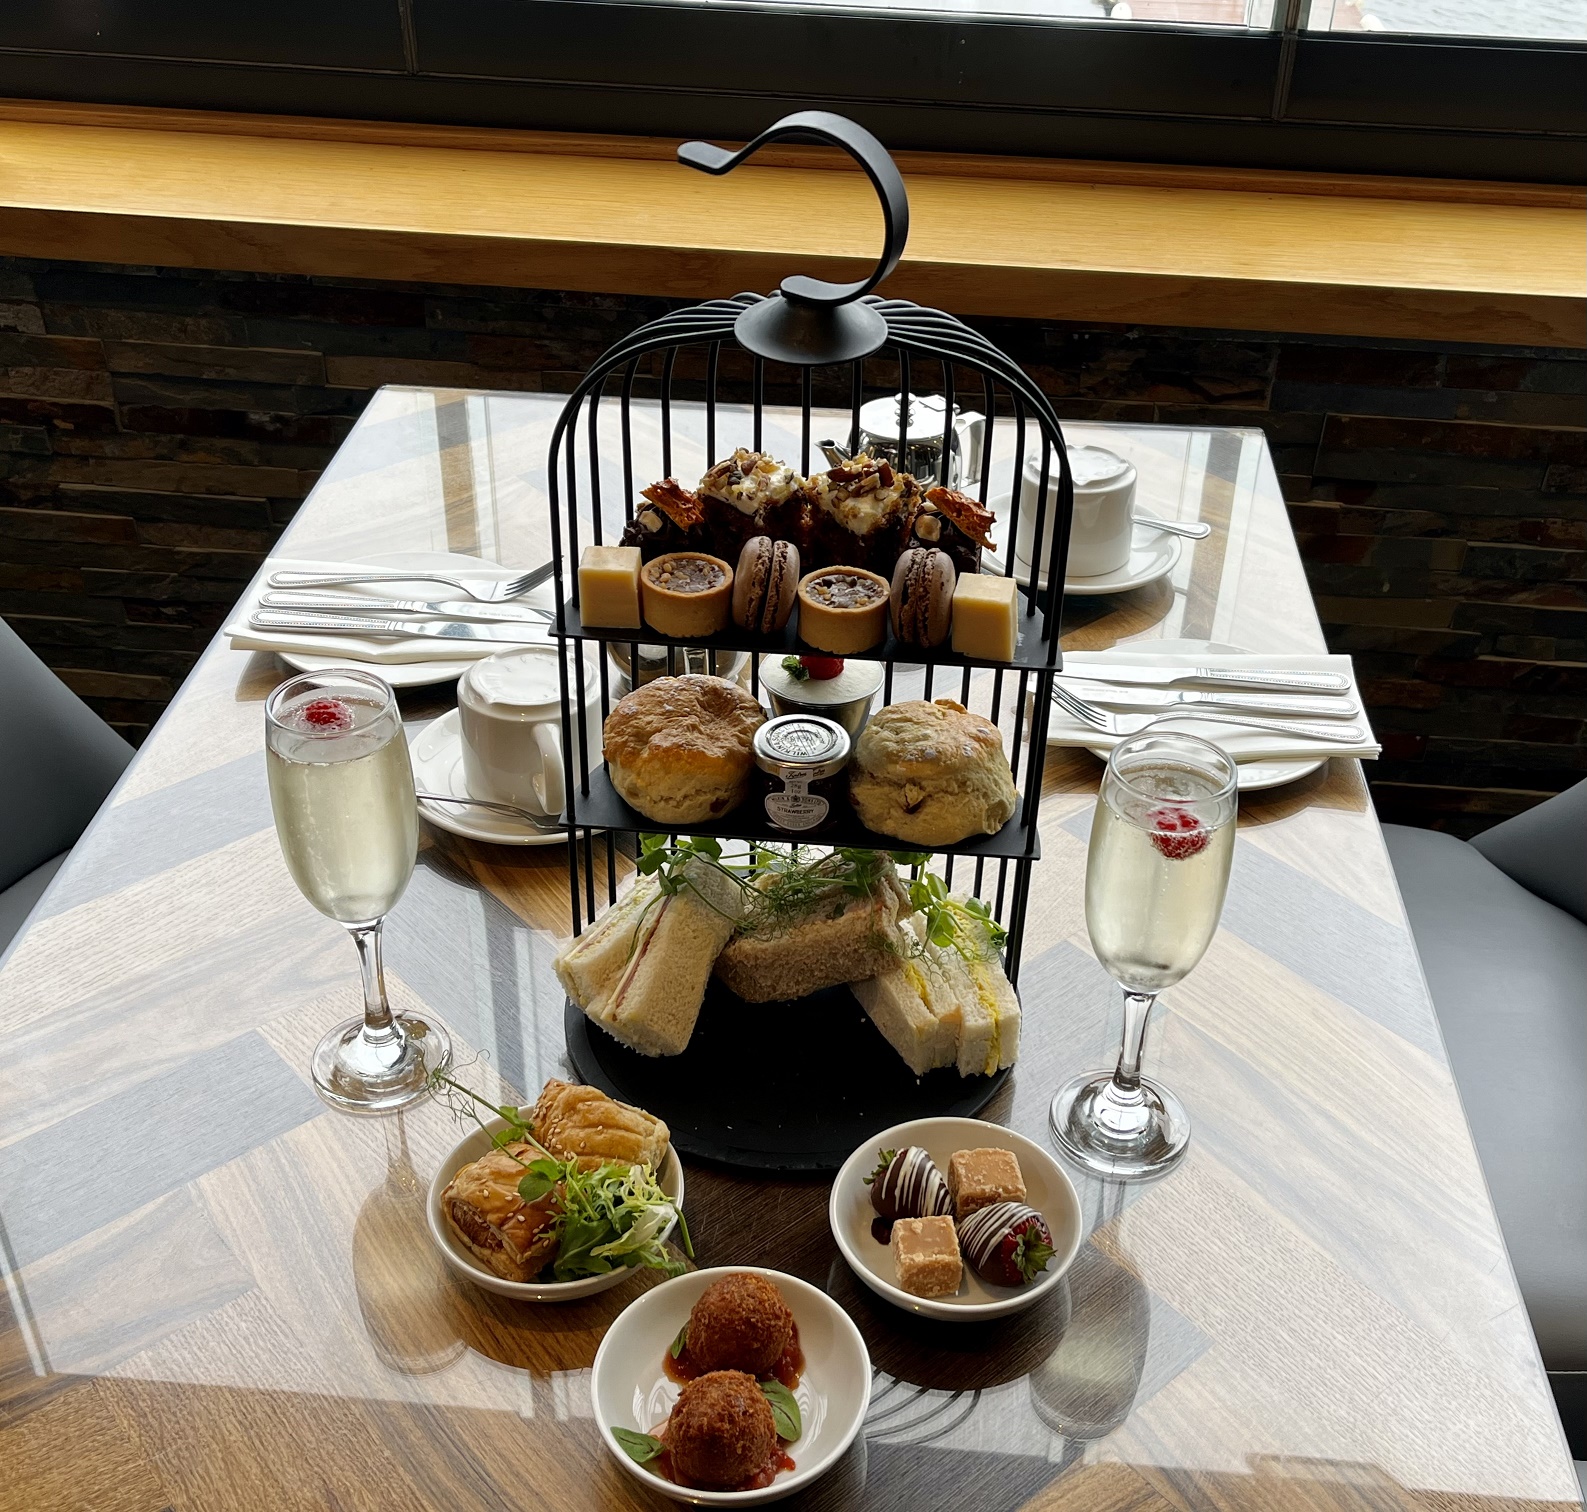 Lochside Afternoon Tea & Thermal Suite for 2 persons